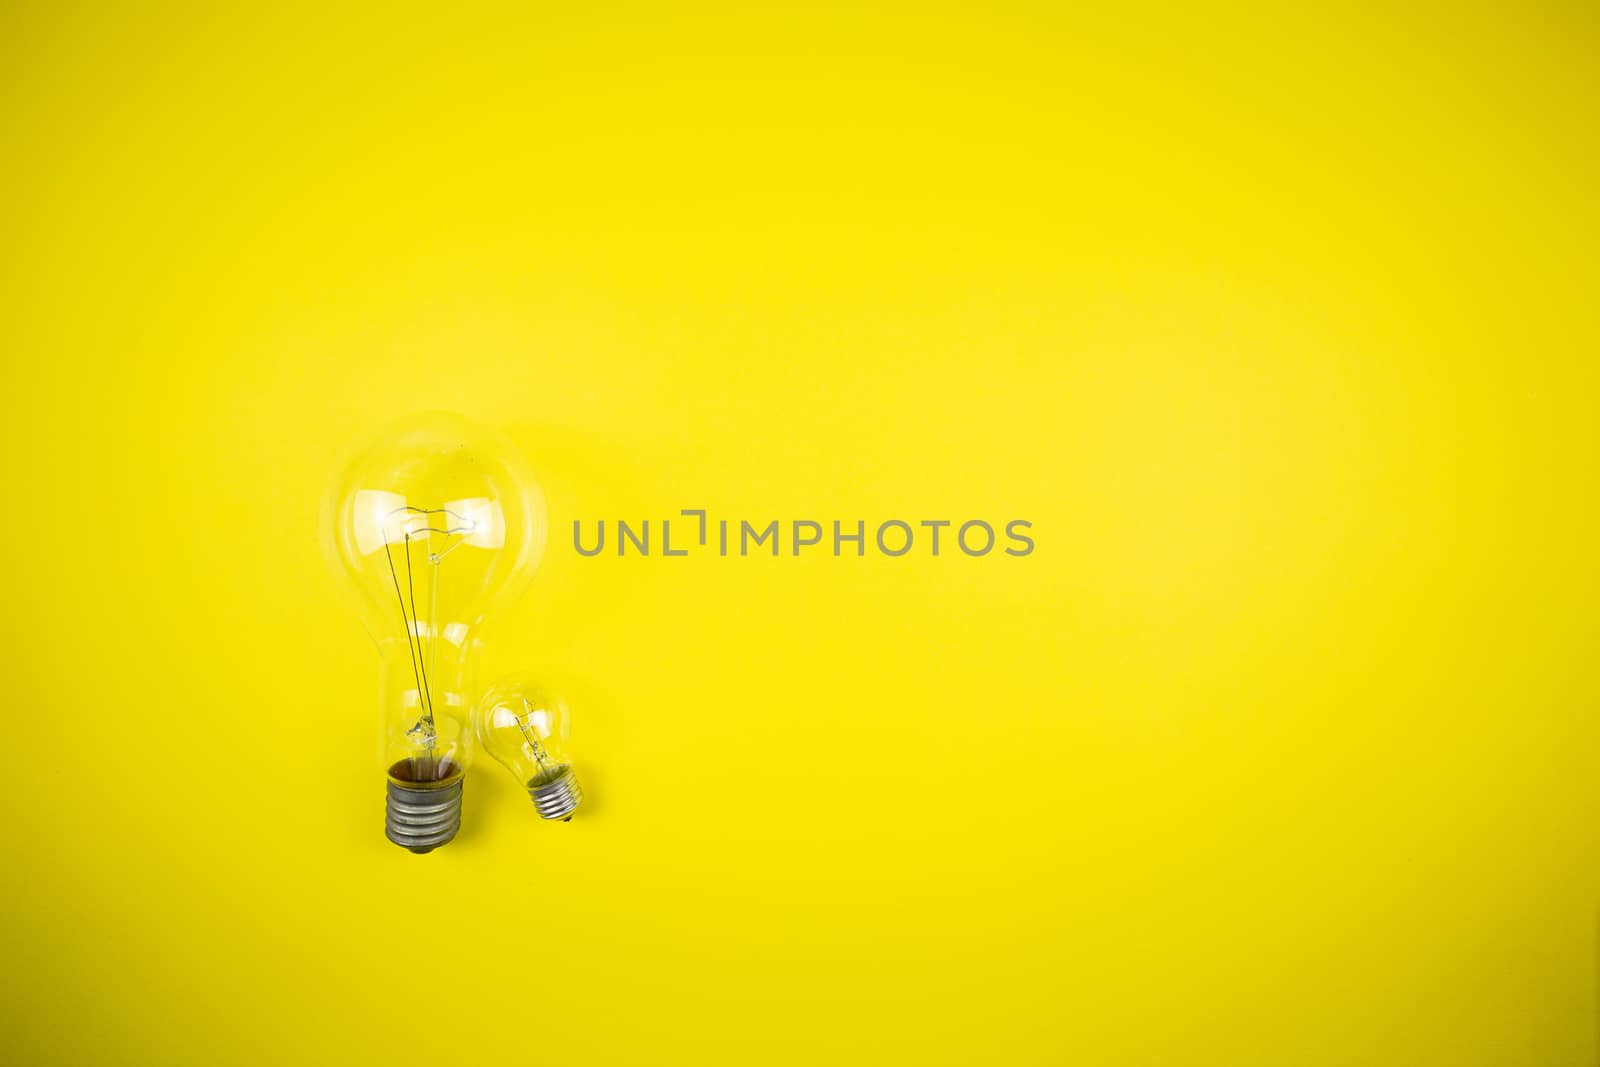 Two bulbs - large and small. Yellow background, tehnology